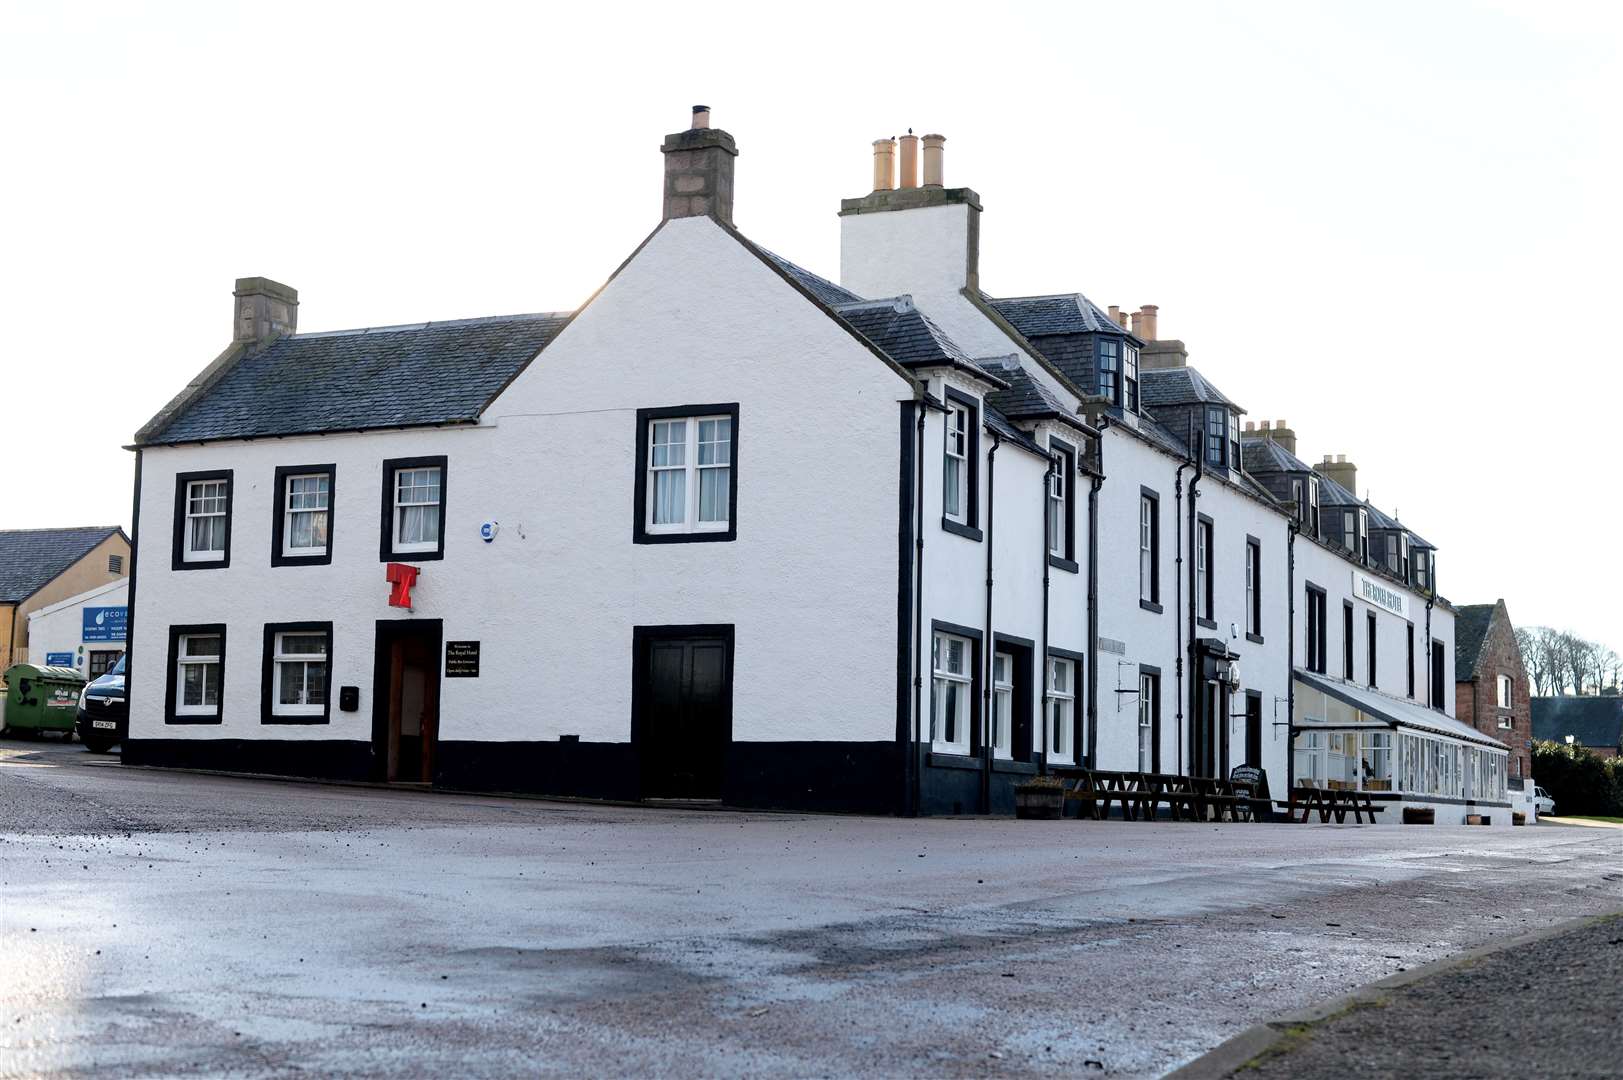 The Royal Hotel in Cromarty will close from Thursday for 10 days in response to the latest Covid-19 clampdown measures.